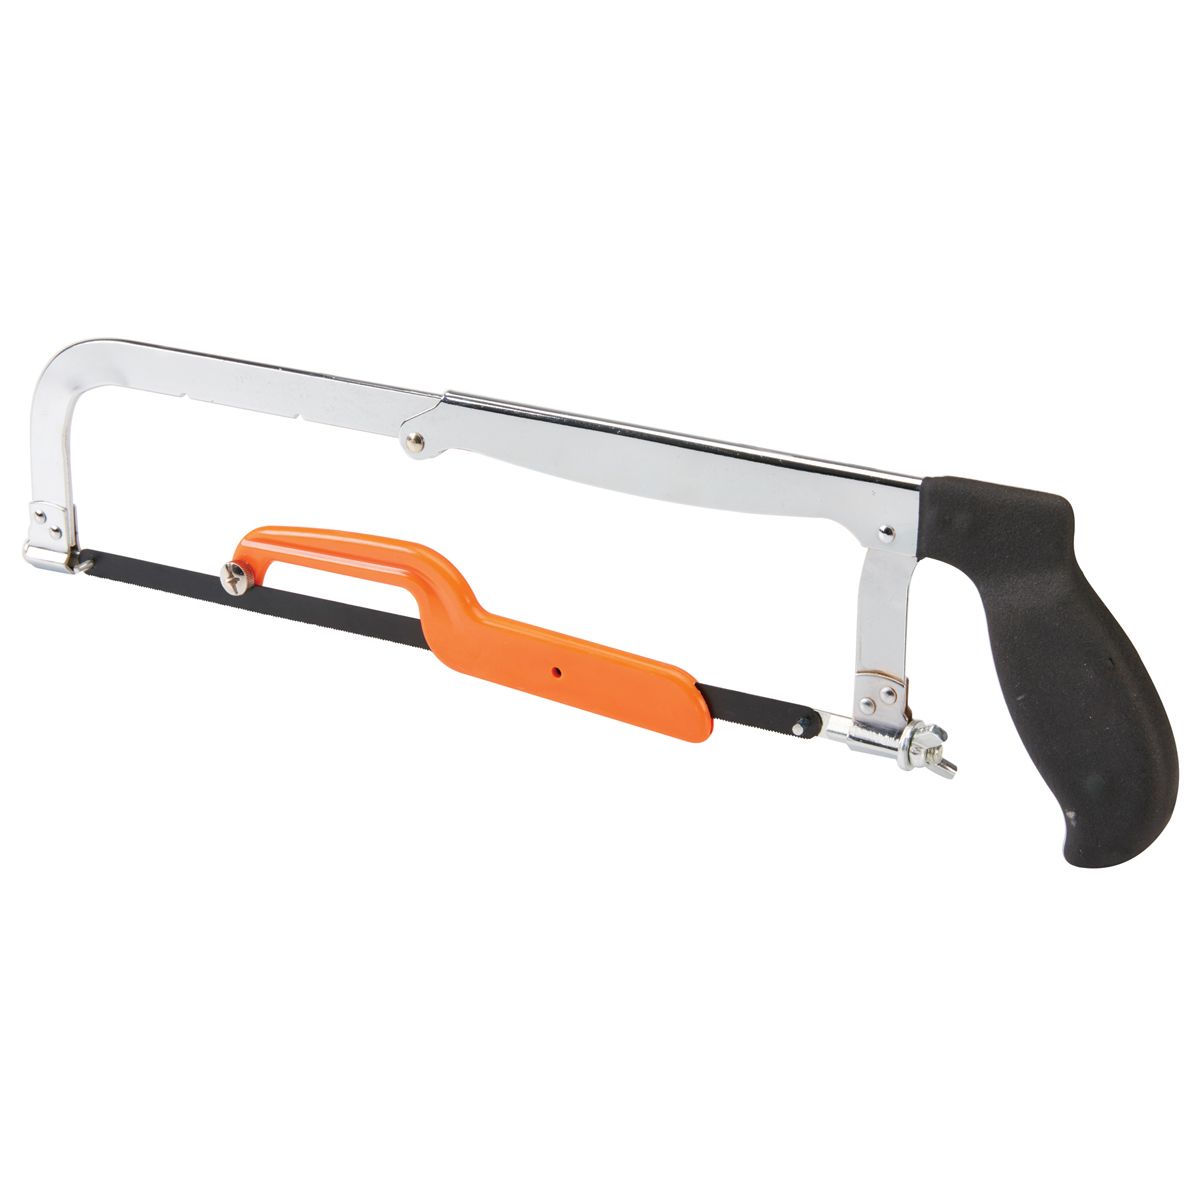 PITTSBURGH 12 in. Hacksaw